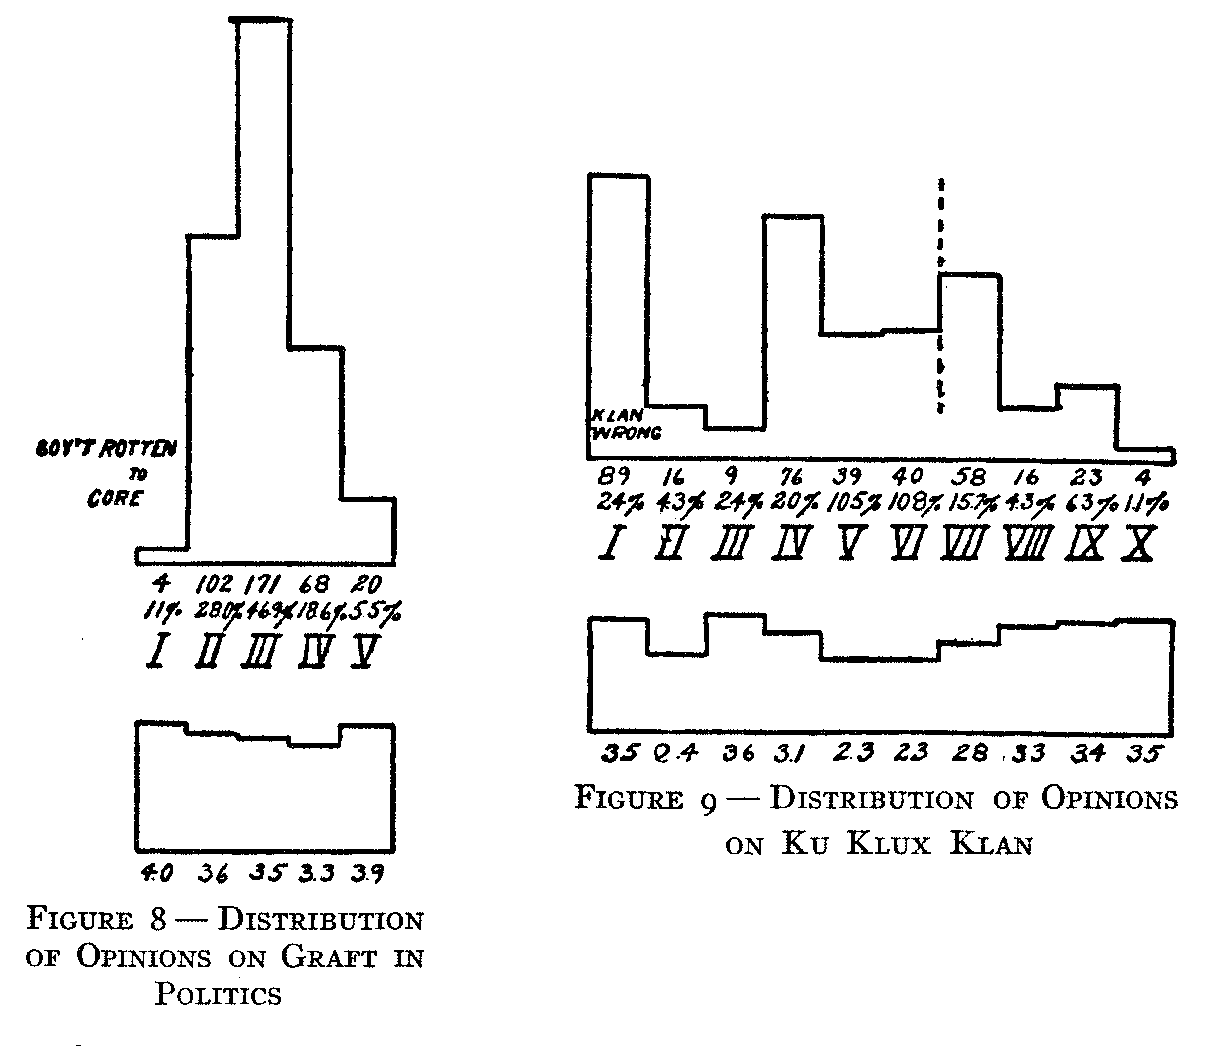 Figure 8 Distribution of Opinions on Graft and Figure 9 Distribution of opinions on Ku Klux Klan